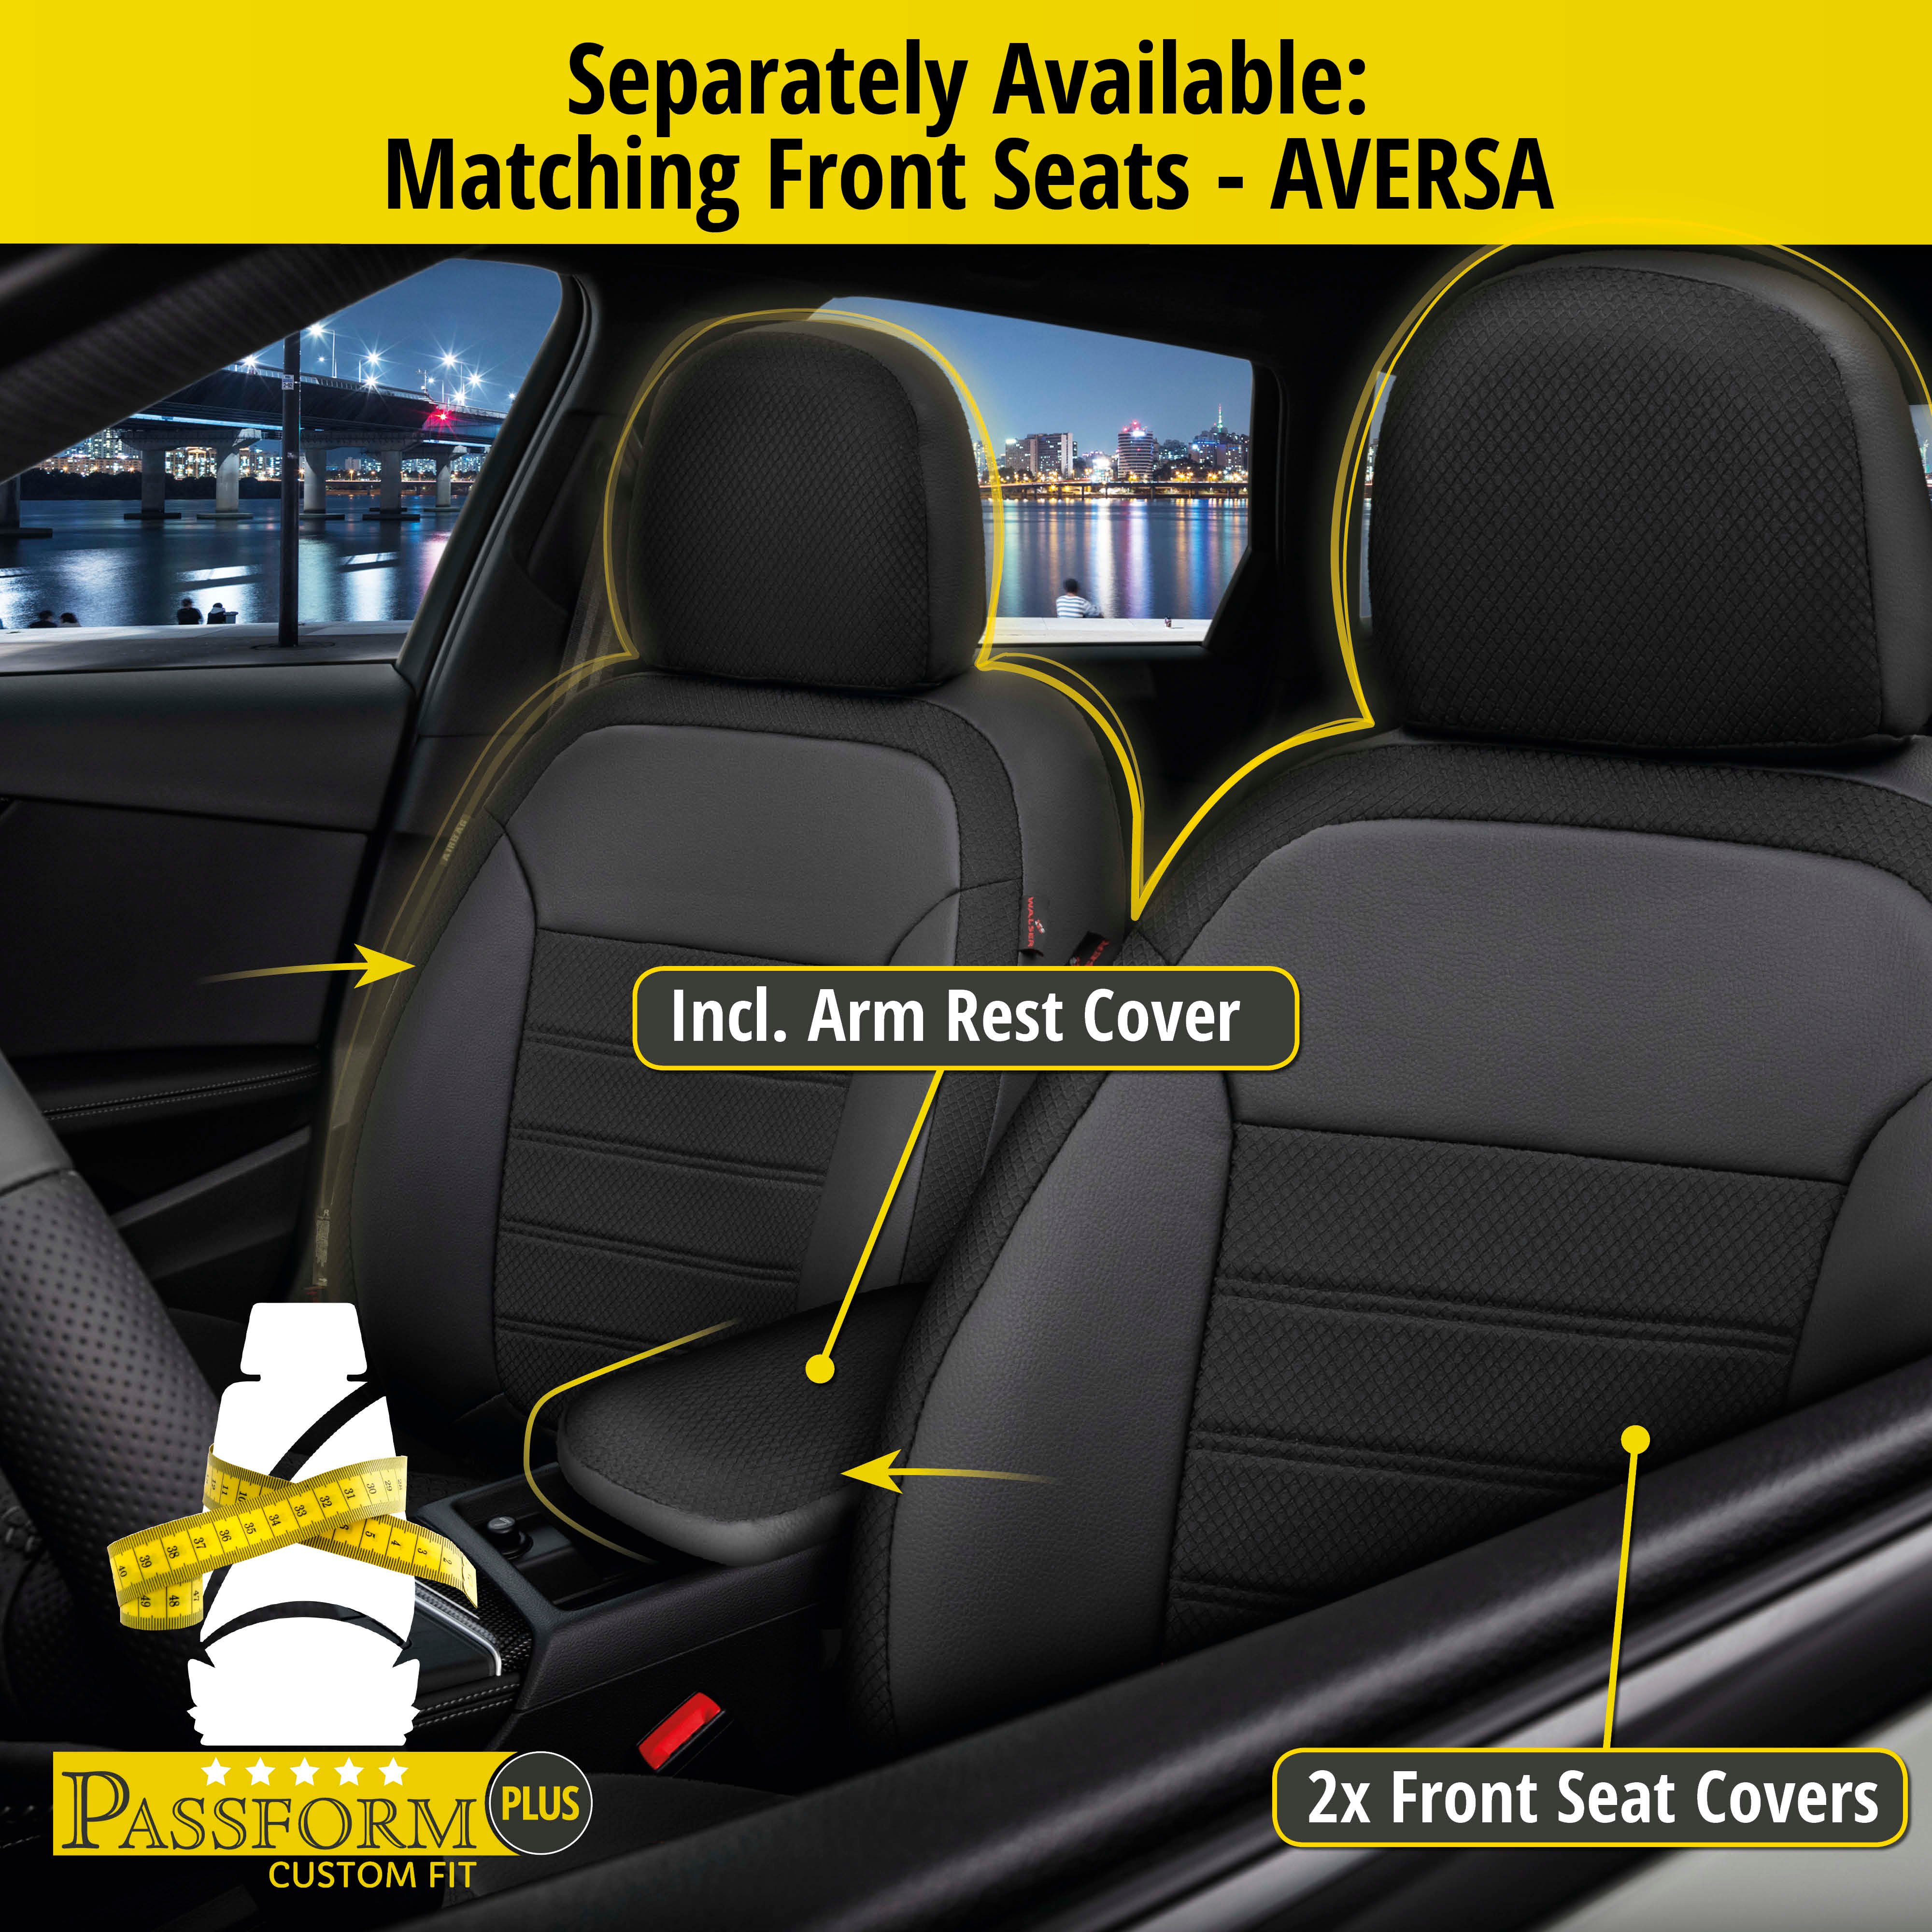 Seat Cover Aversa for Skoda Octavia 2013-Today, 1 rear seat cover for normal seats